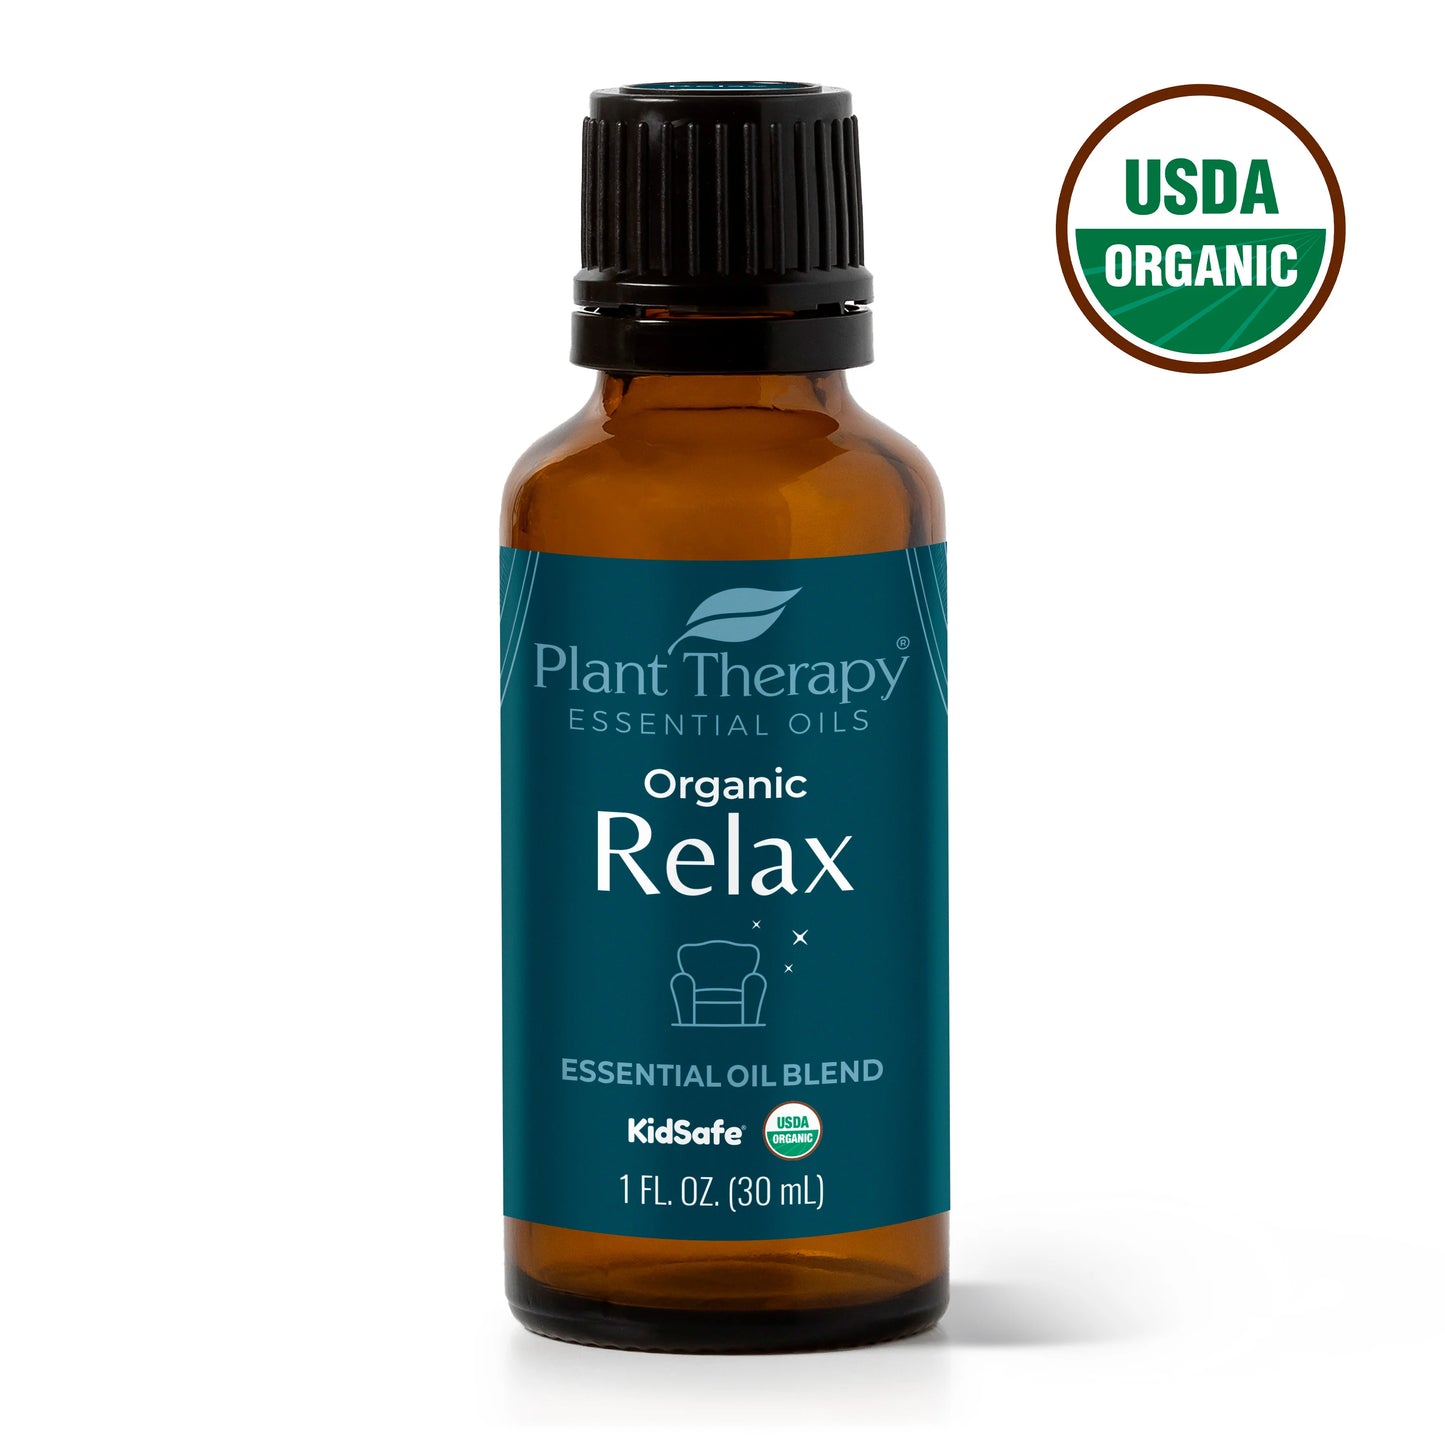 Plant Therapy 30 mL Essential Oils